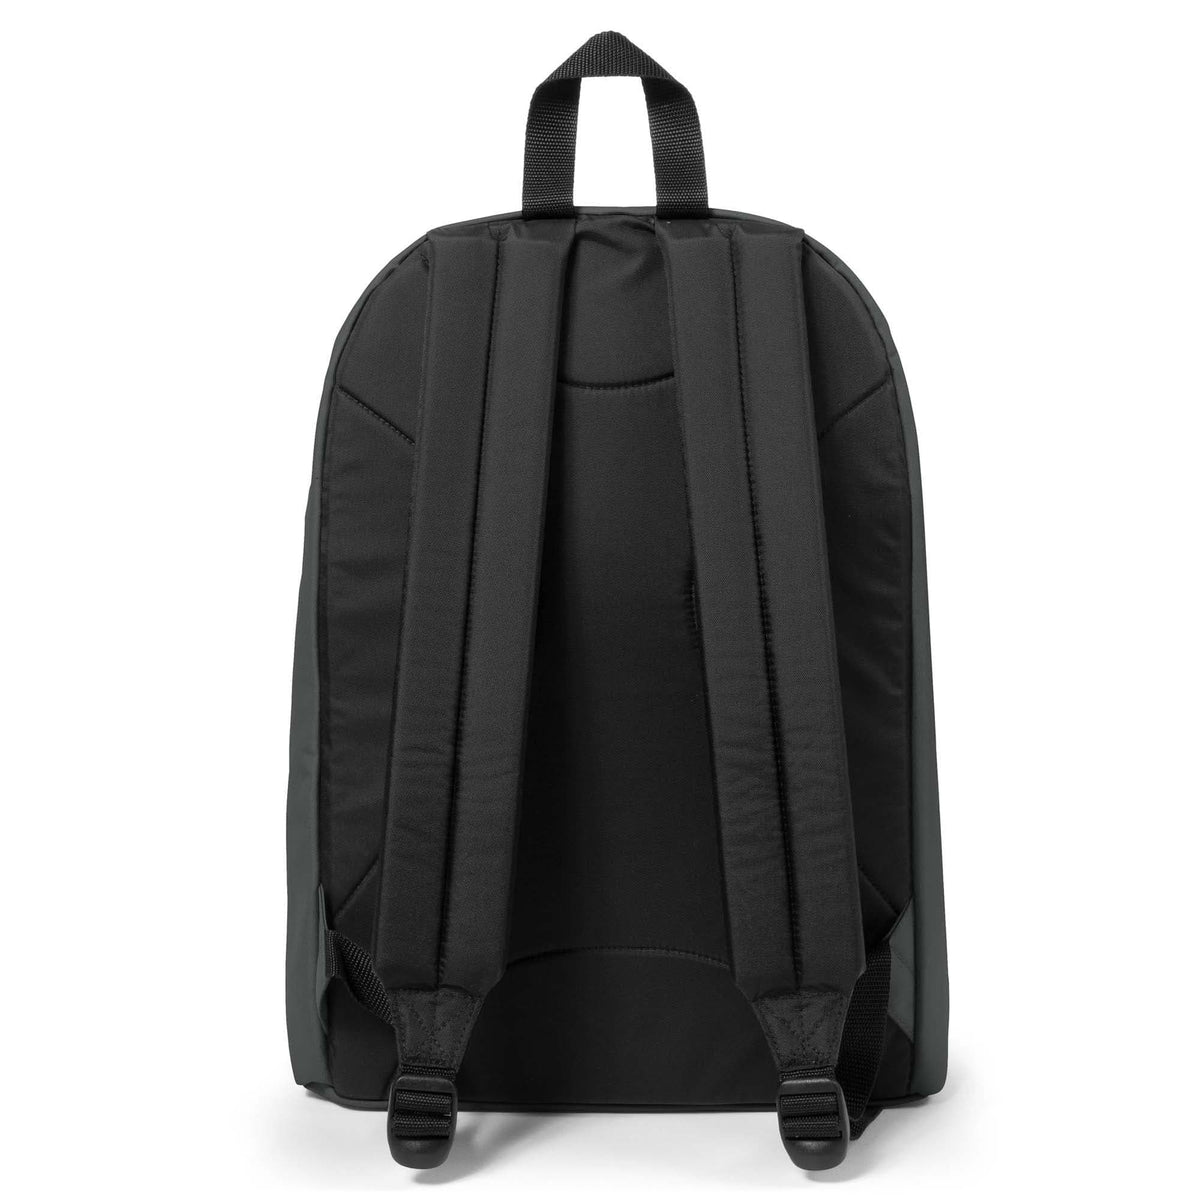 Eastpak Out Of Office Simple Styled Backpack